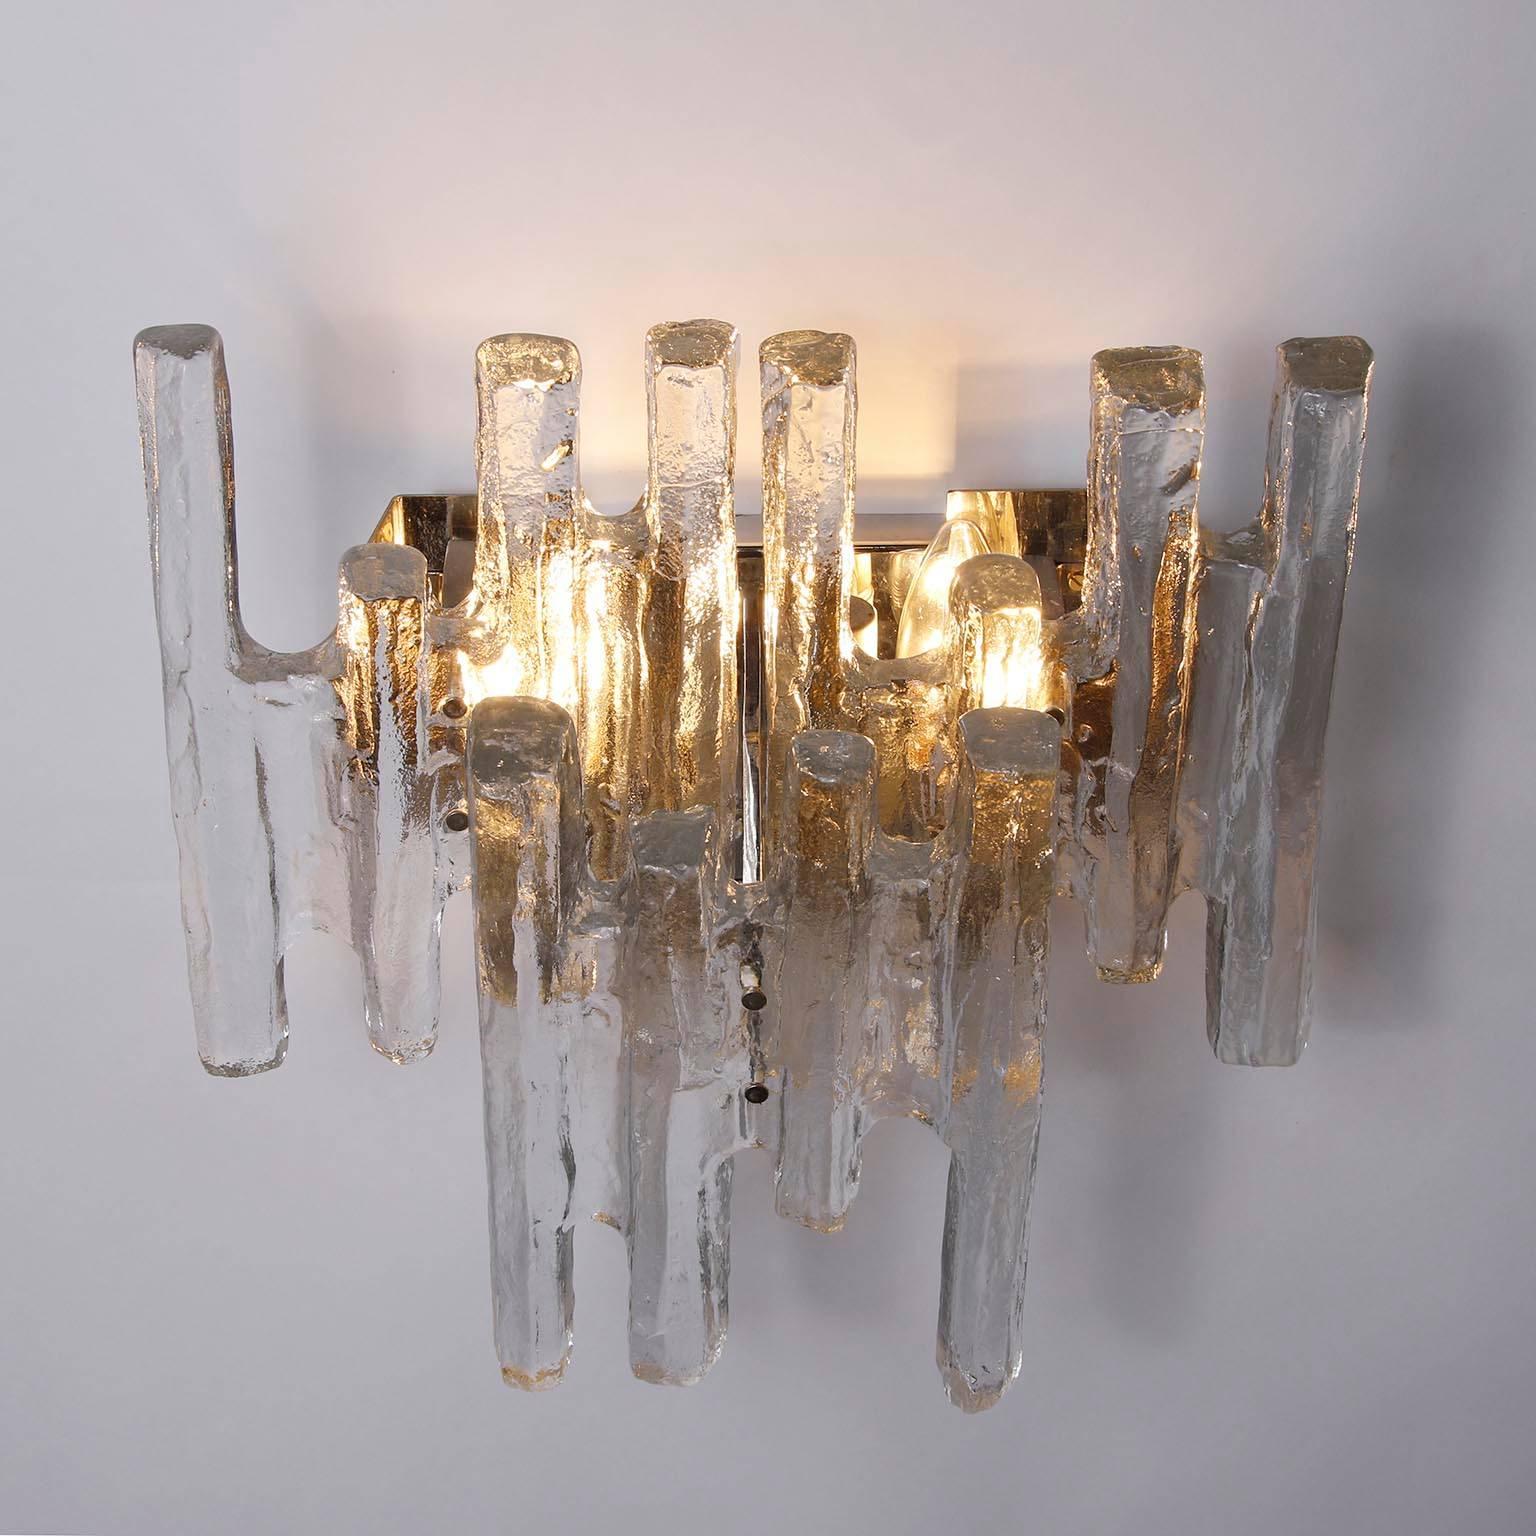 Pair Mid-Century Modern Sconces Wall Lights 'Pan' by Kalmar, Glass Nickel, 1970s For Sale 5